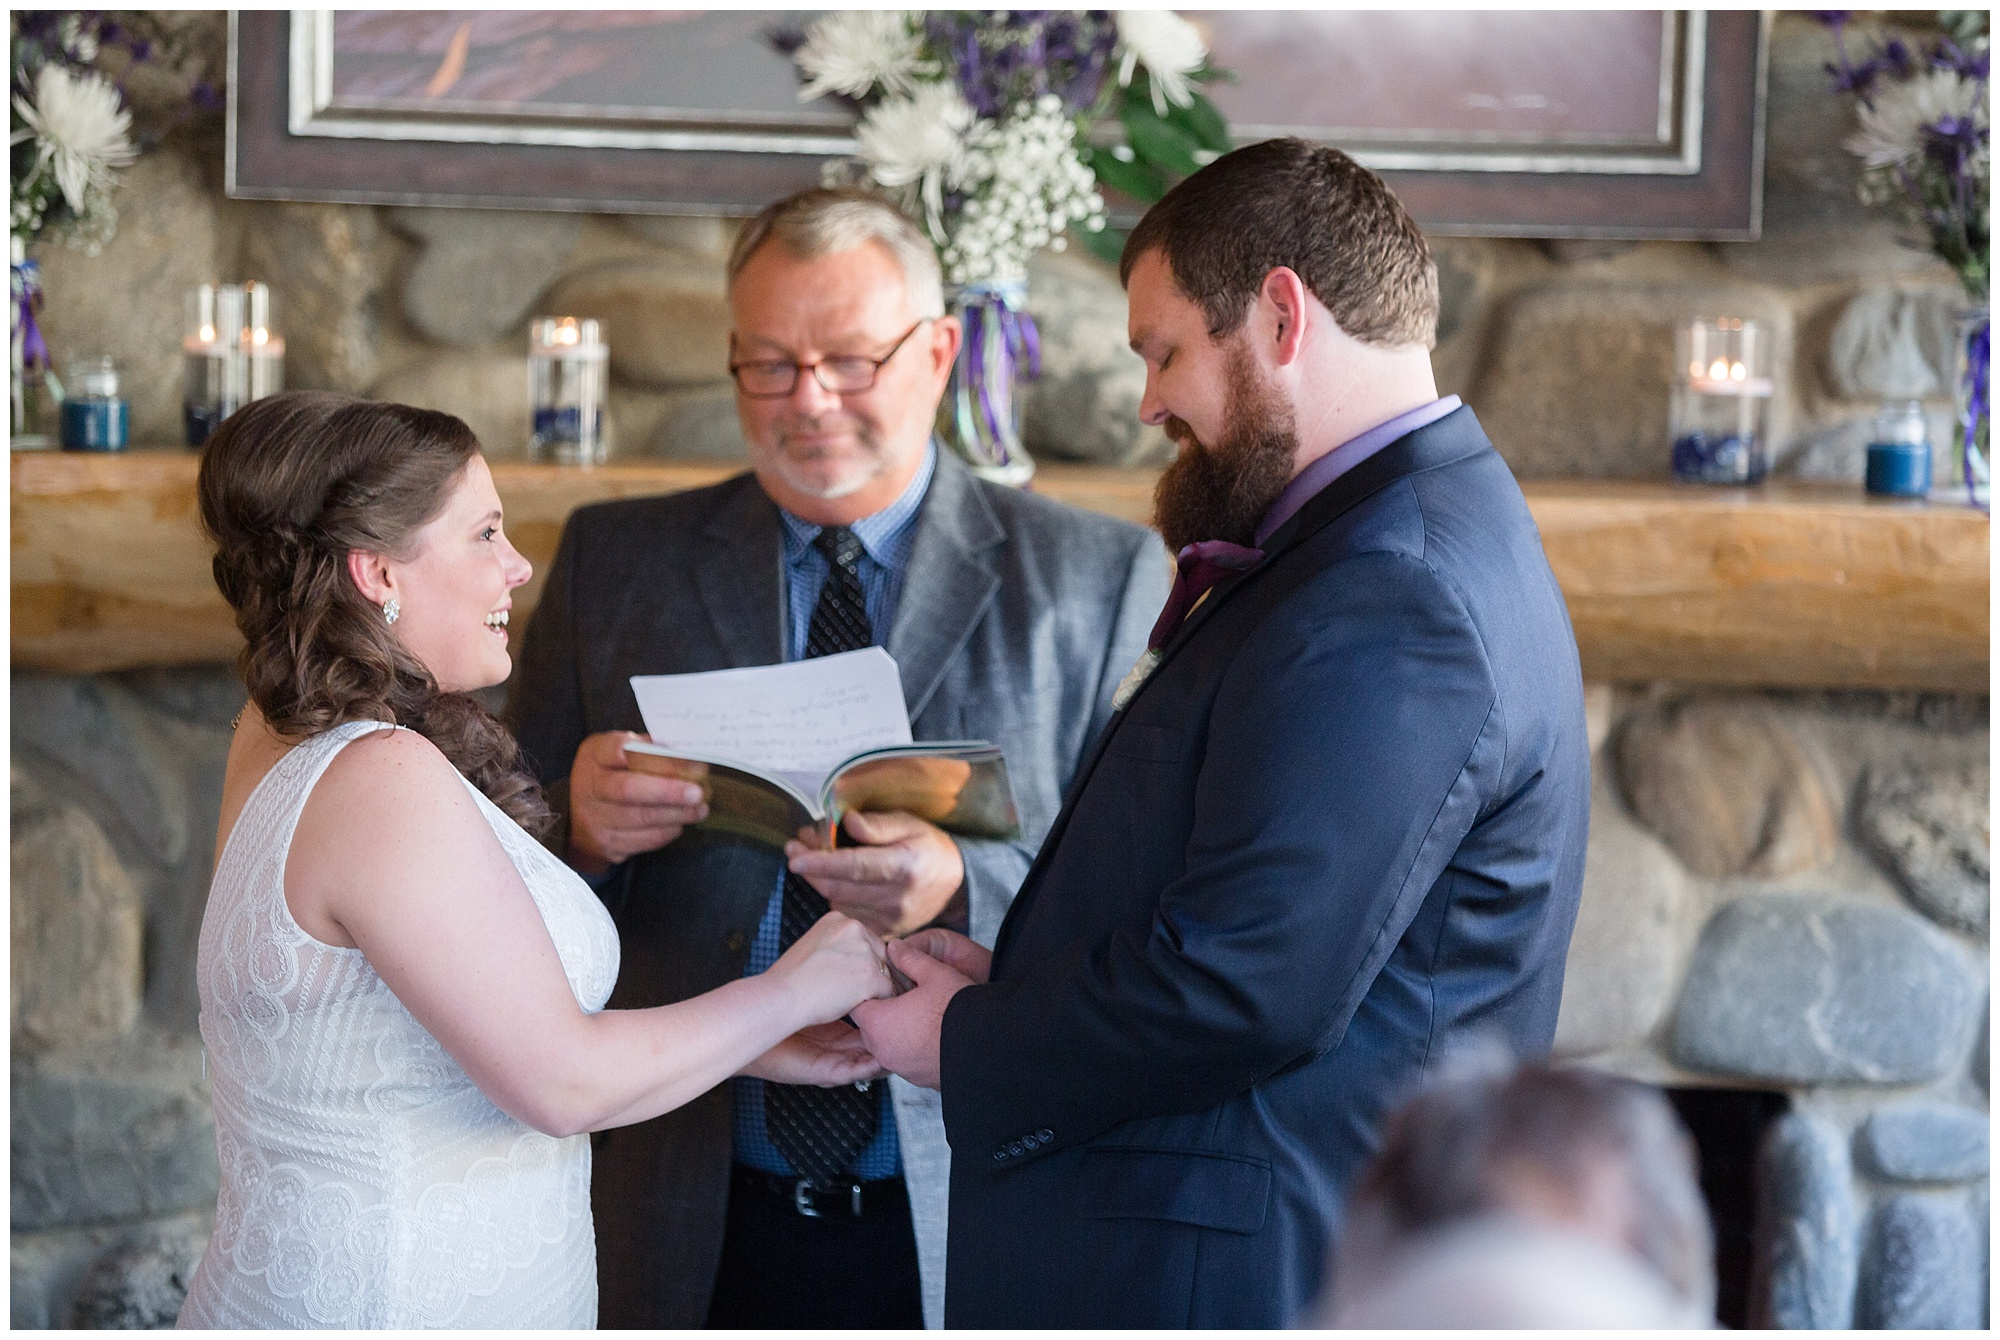 Groom places the ring on his bride's finger during their breckenridge cabin elopement ceremony.